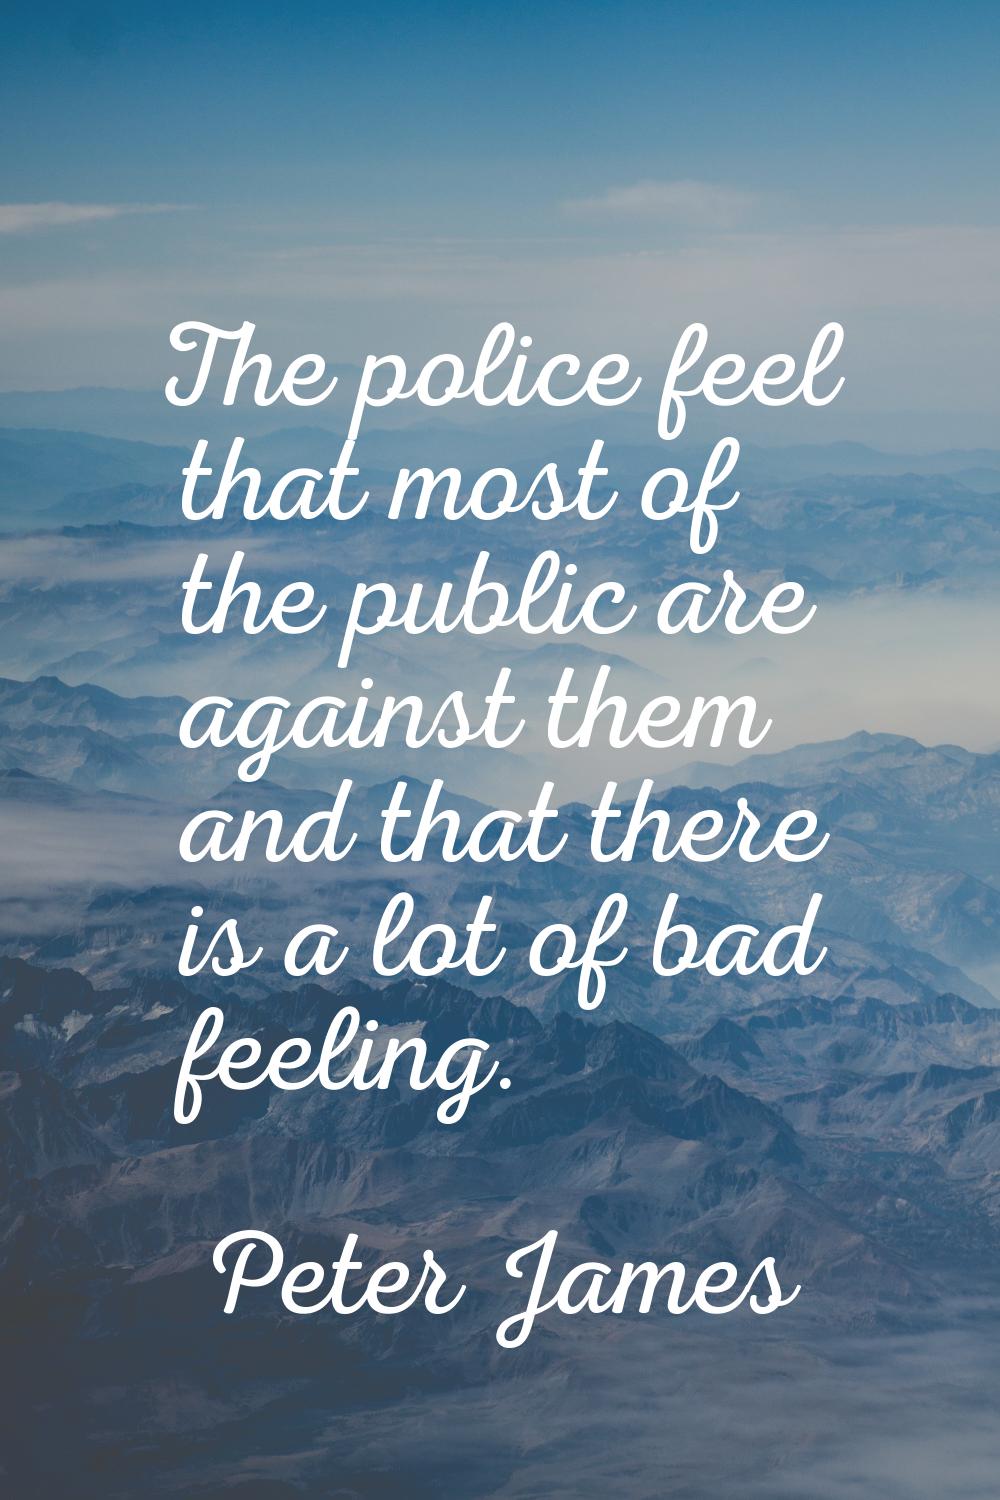 The police feel that most of the public are against them and that there is a lot of bad feeling.